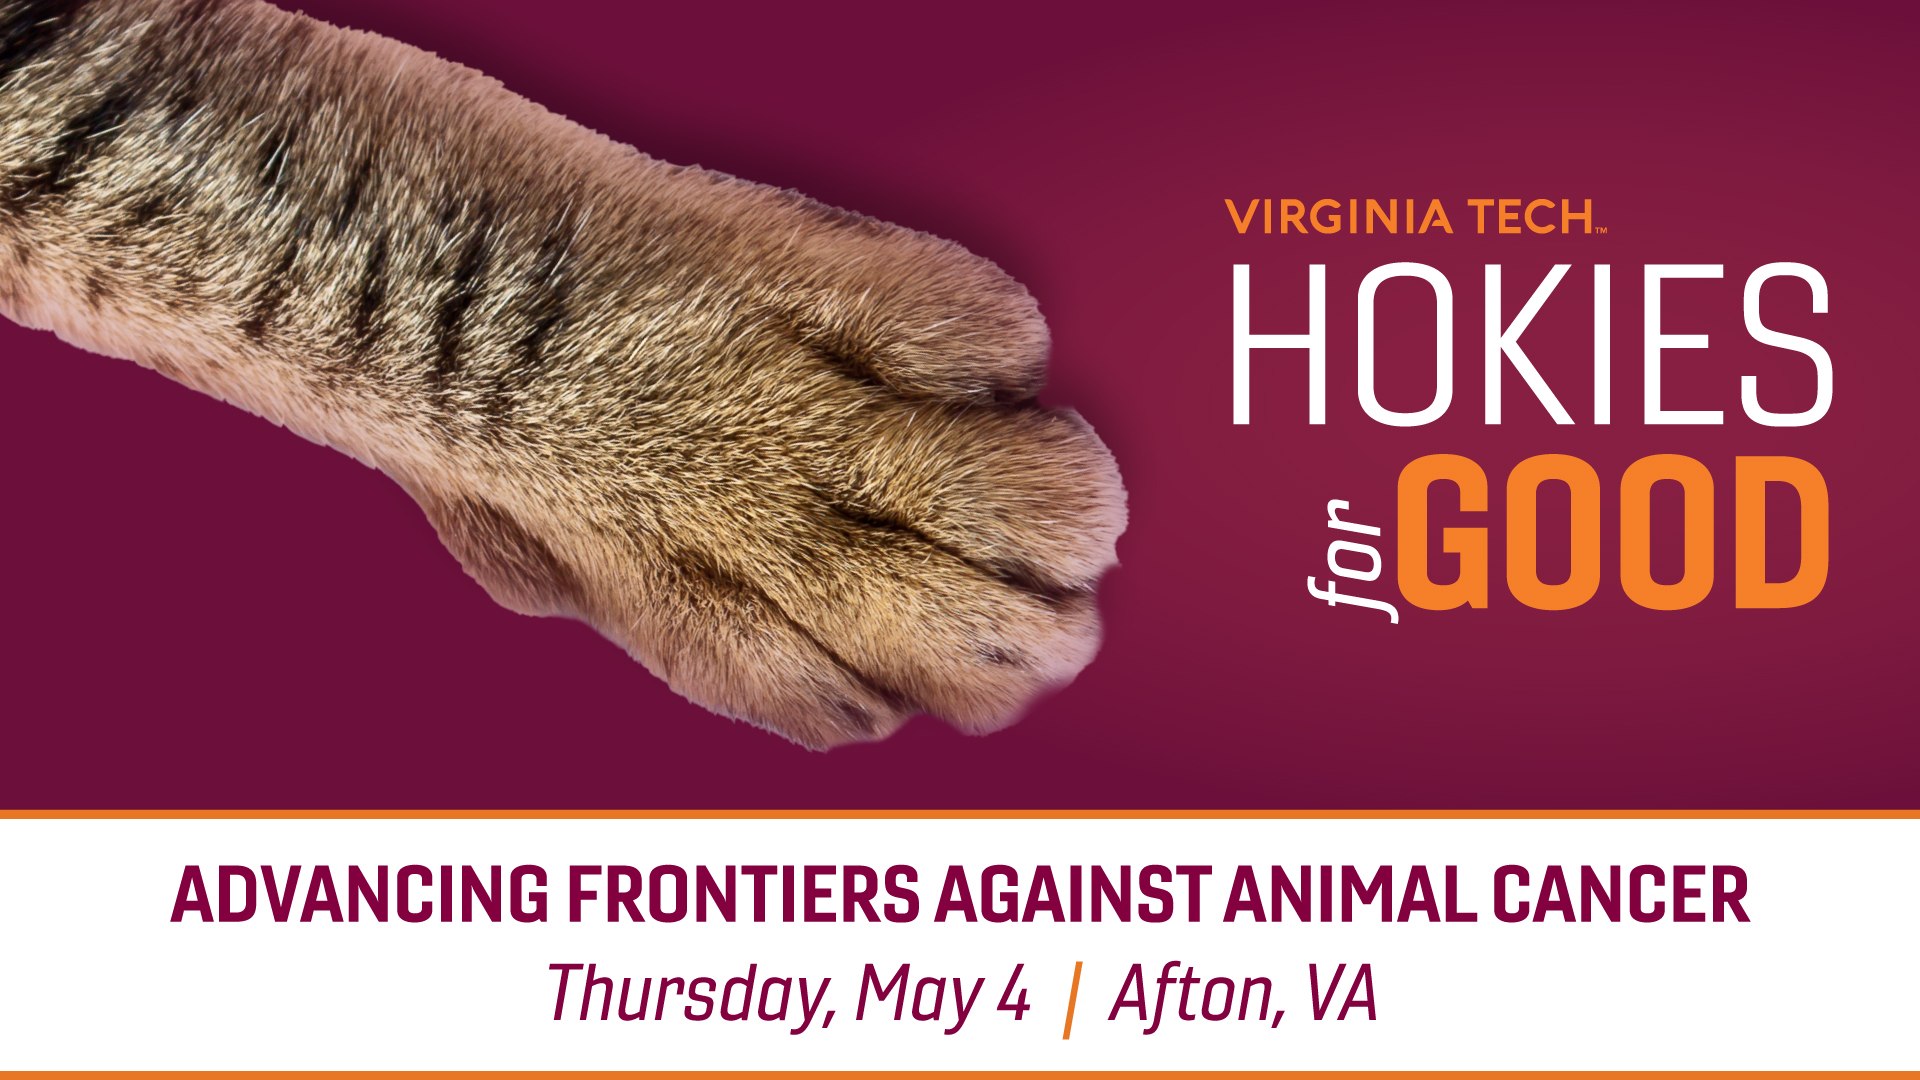 Hokies for Good: Advancing Frontiers Against Animal Cancer